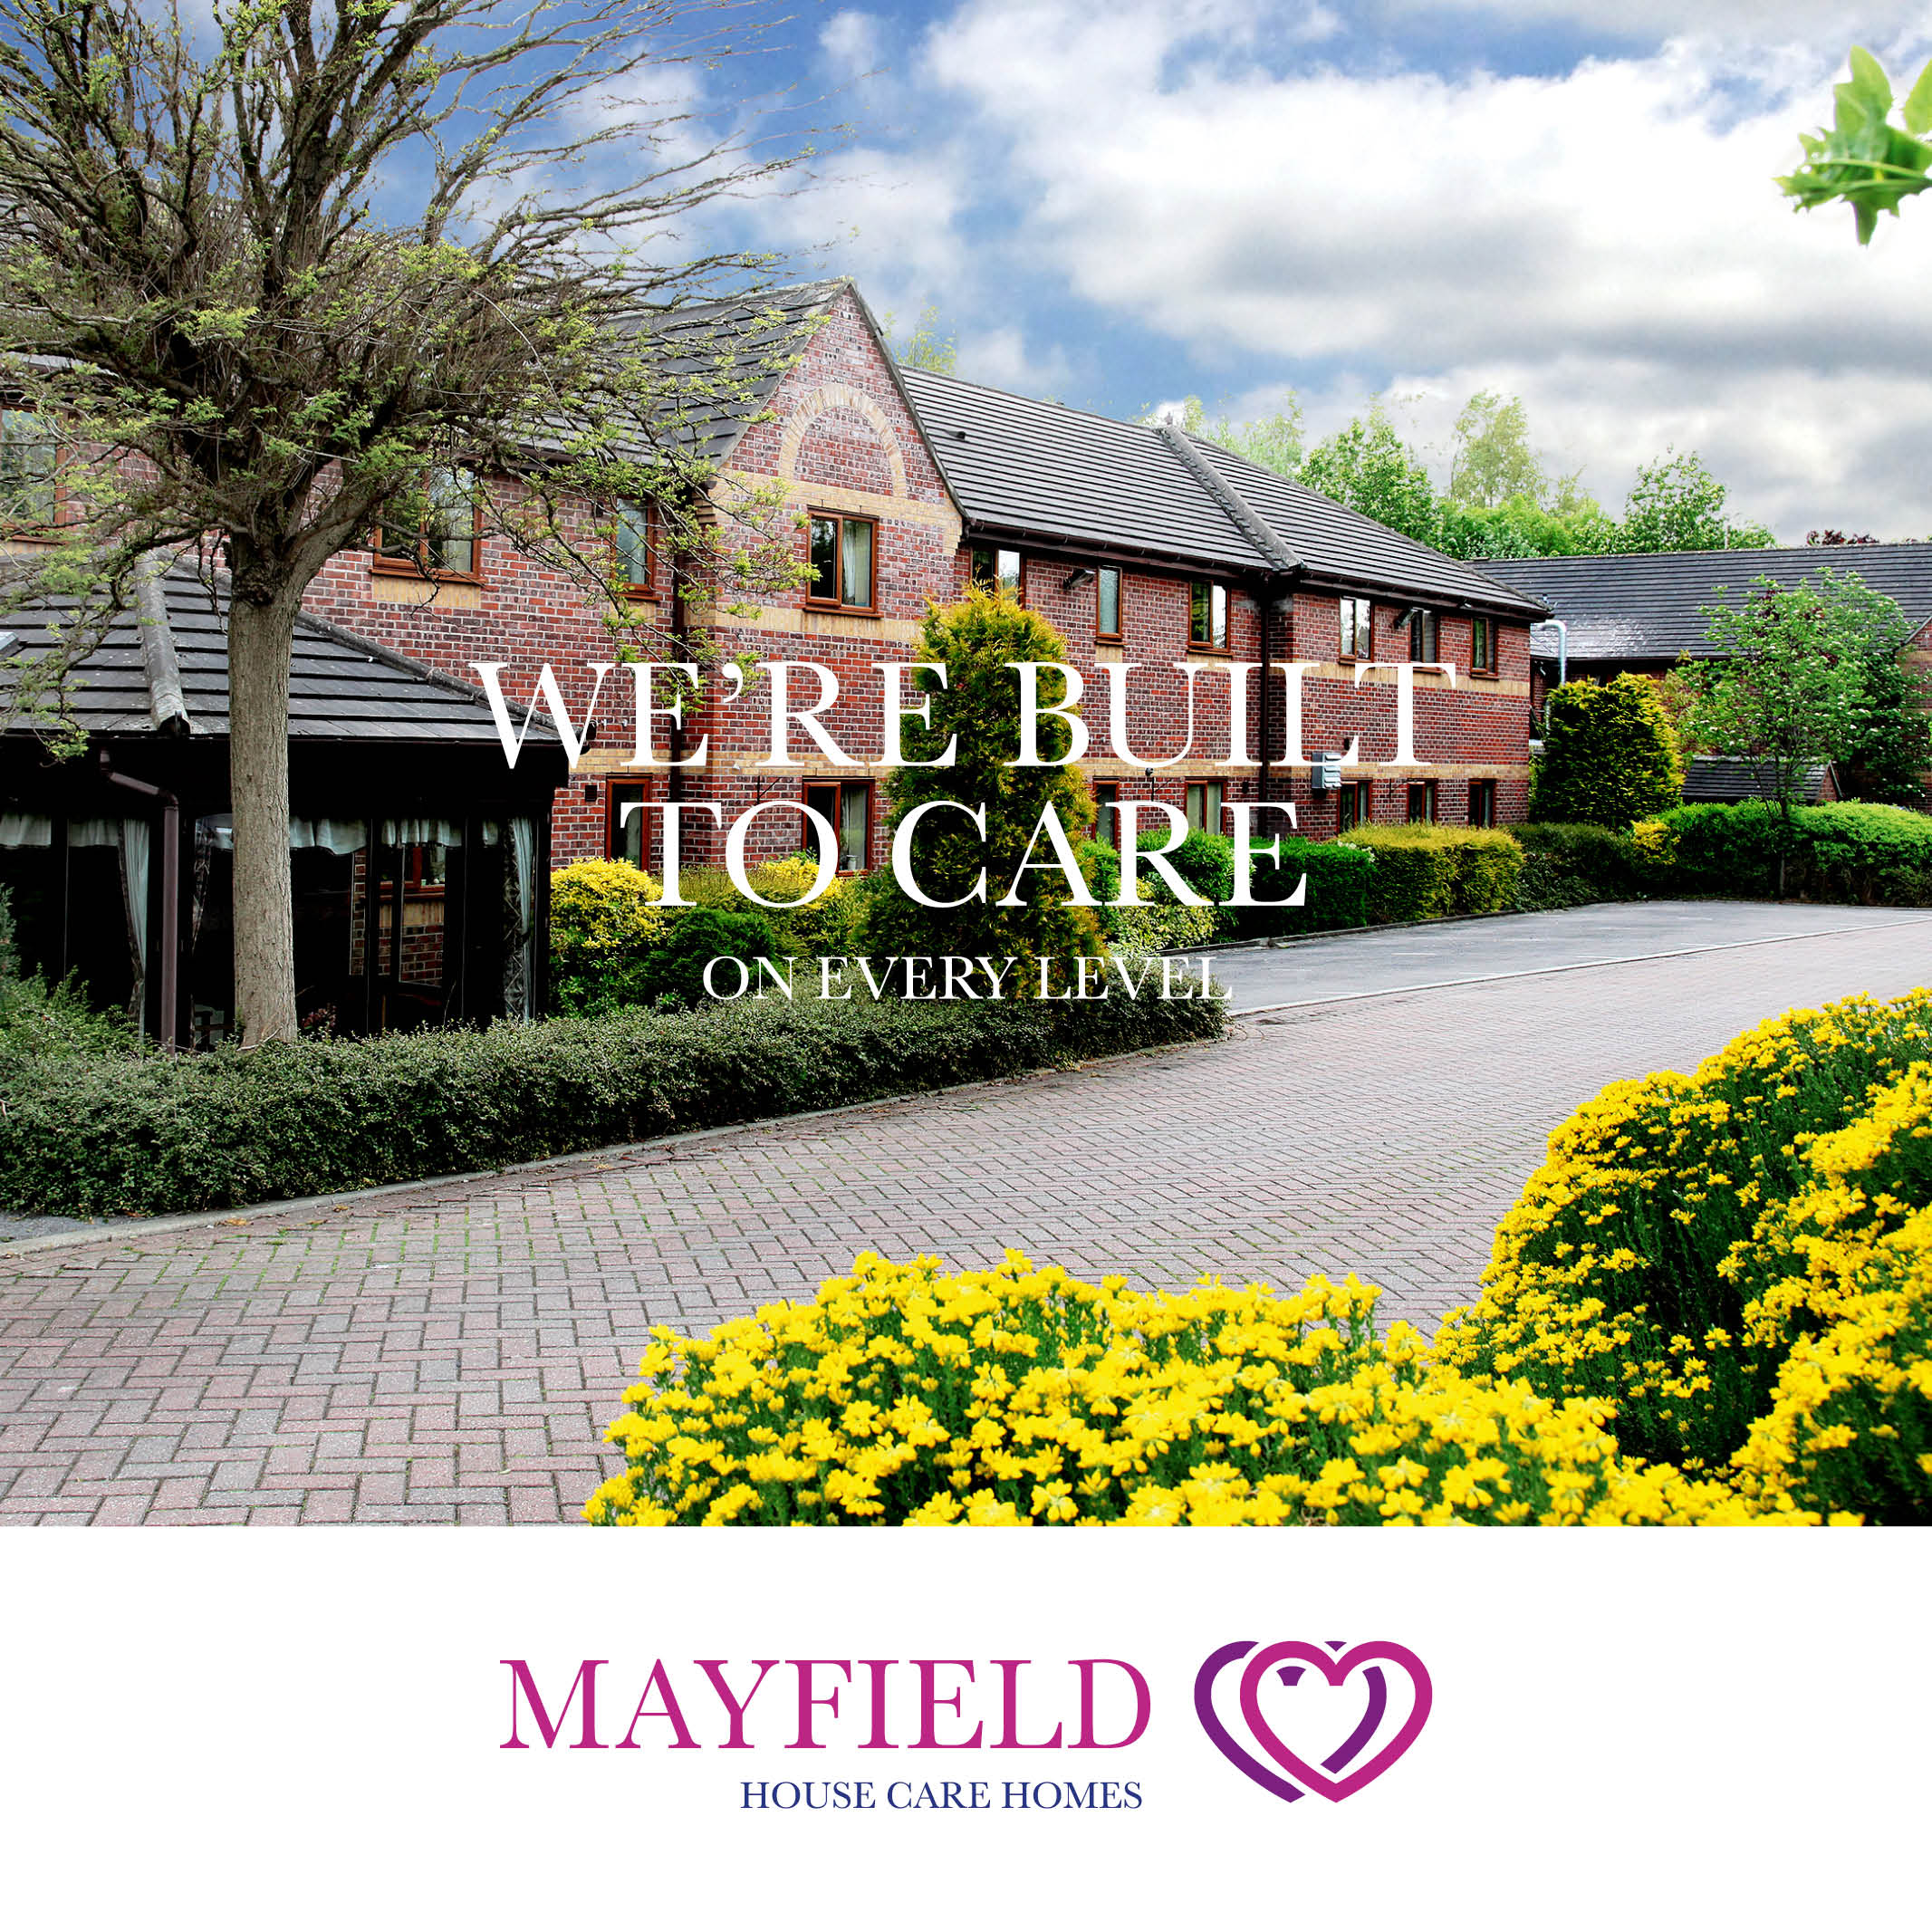 We're Built To Care On Every Level